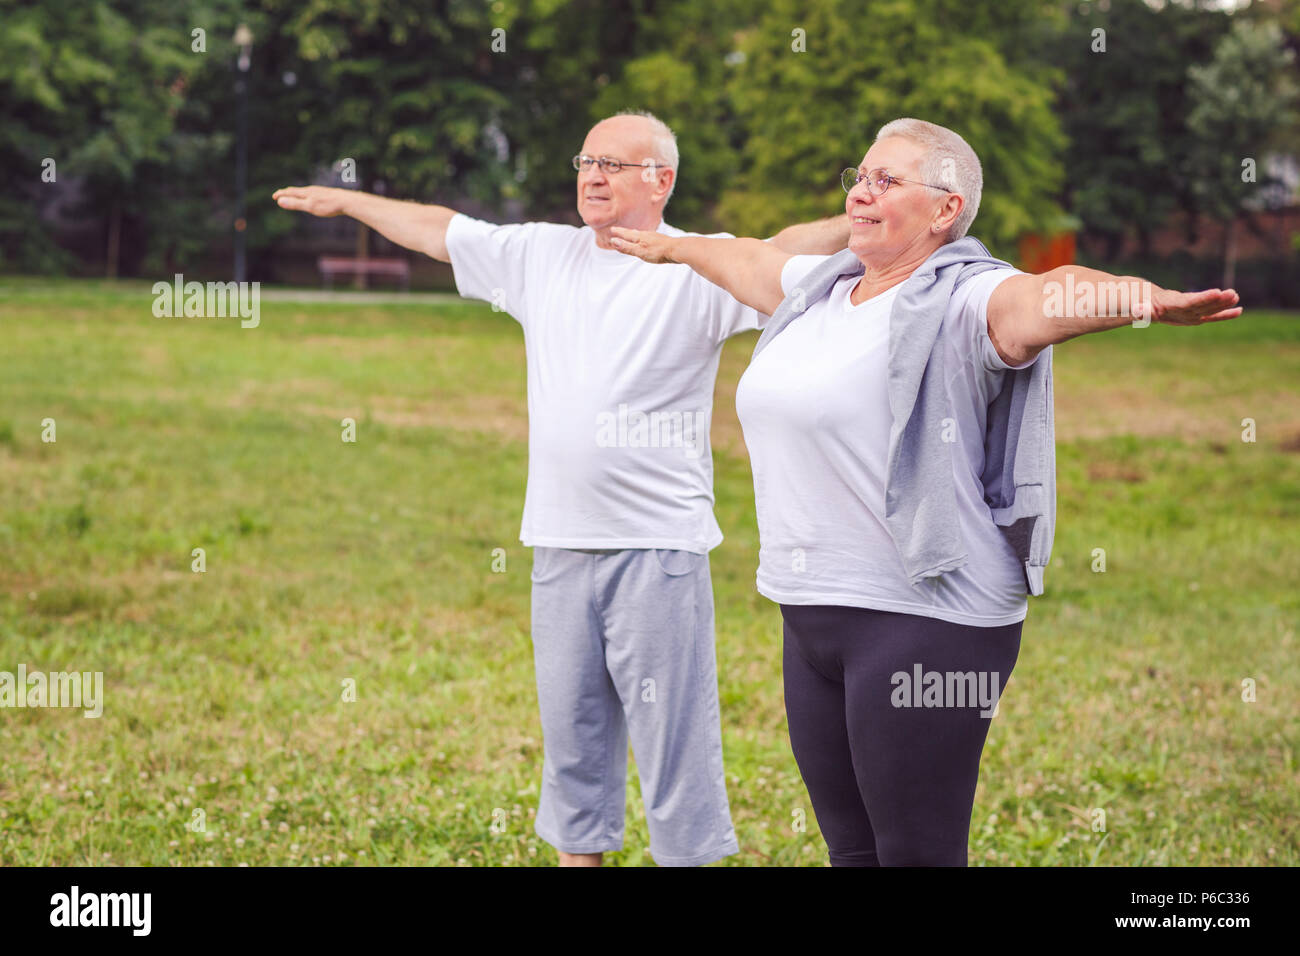 Smiling senior couple are outdoors in a park exercise with dumbbells and having fun together Stock Photo